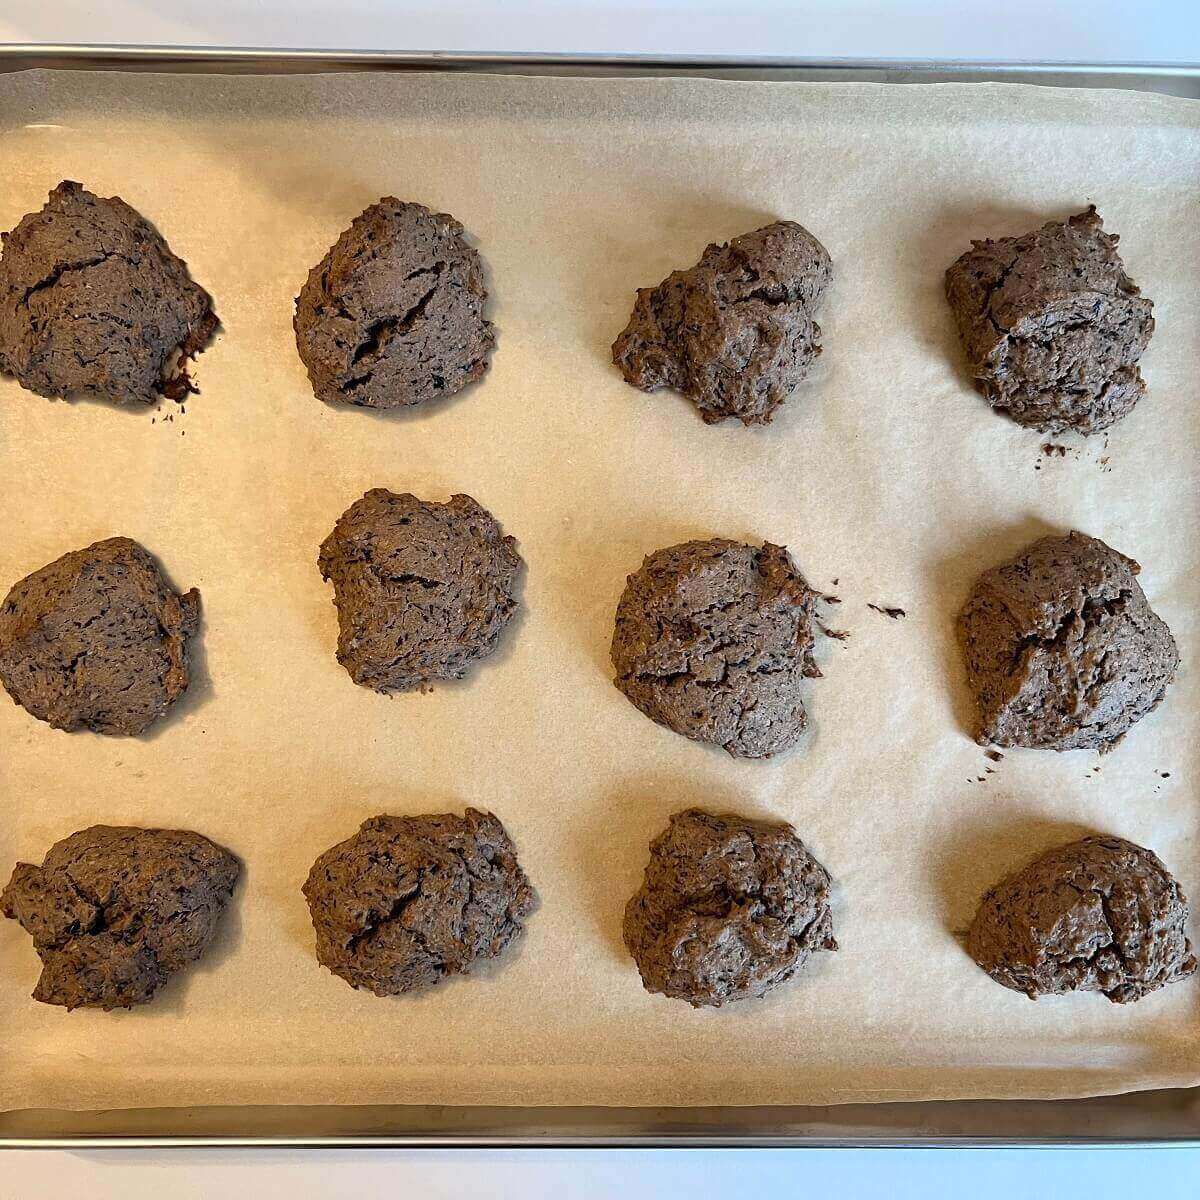 Twelve freshly baked cookies on a sheet pan lined with parchment paper.